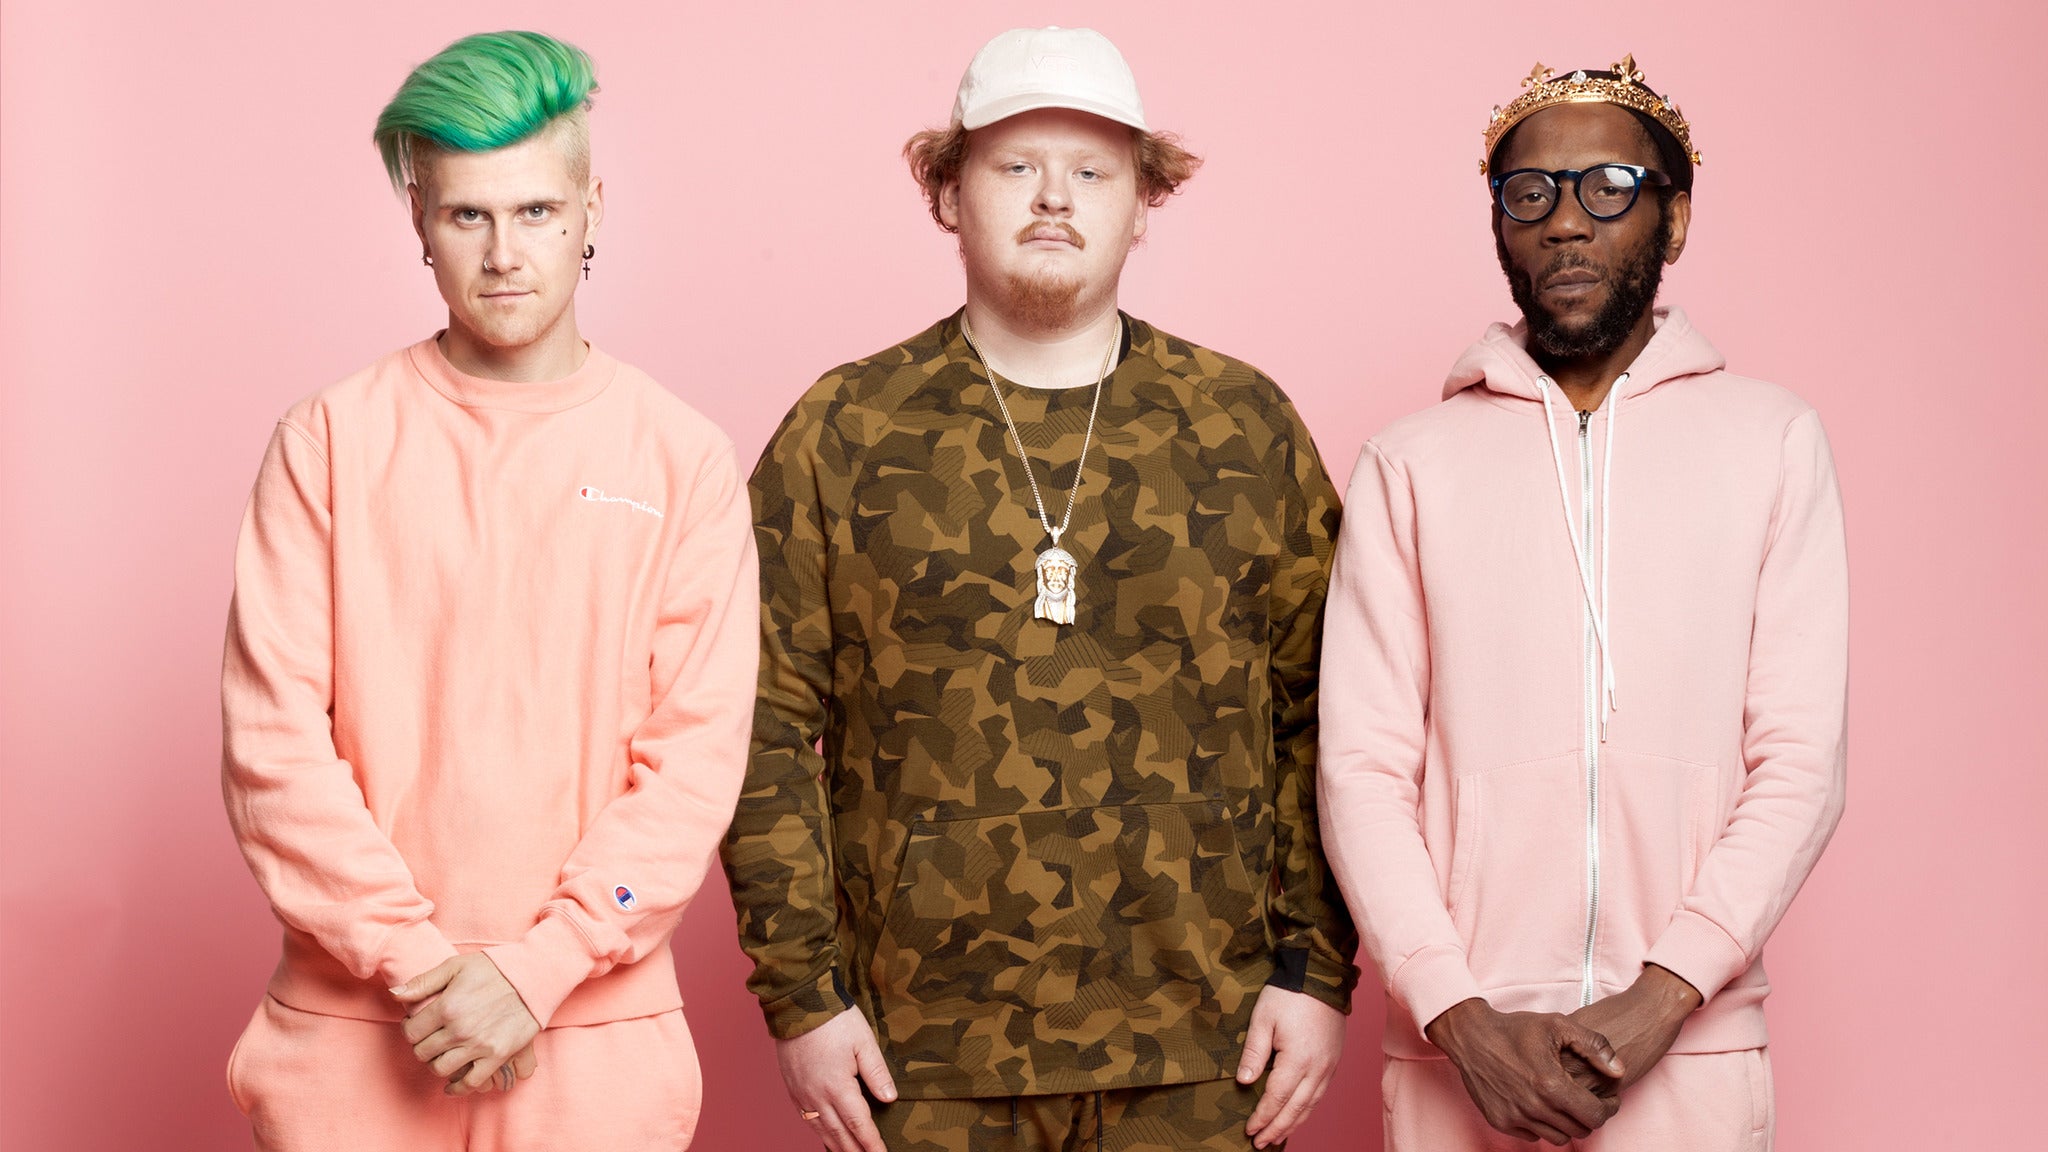 Too Many Zooz in Minneapolis promo photo for Exclusive presale offer code